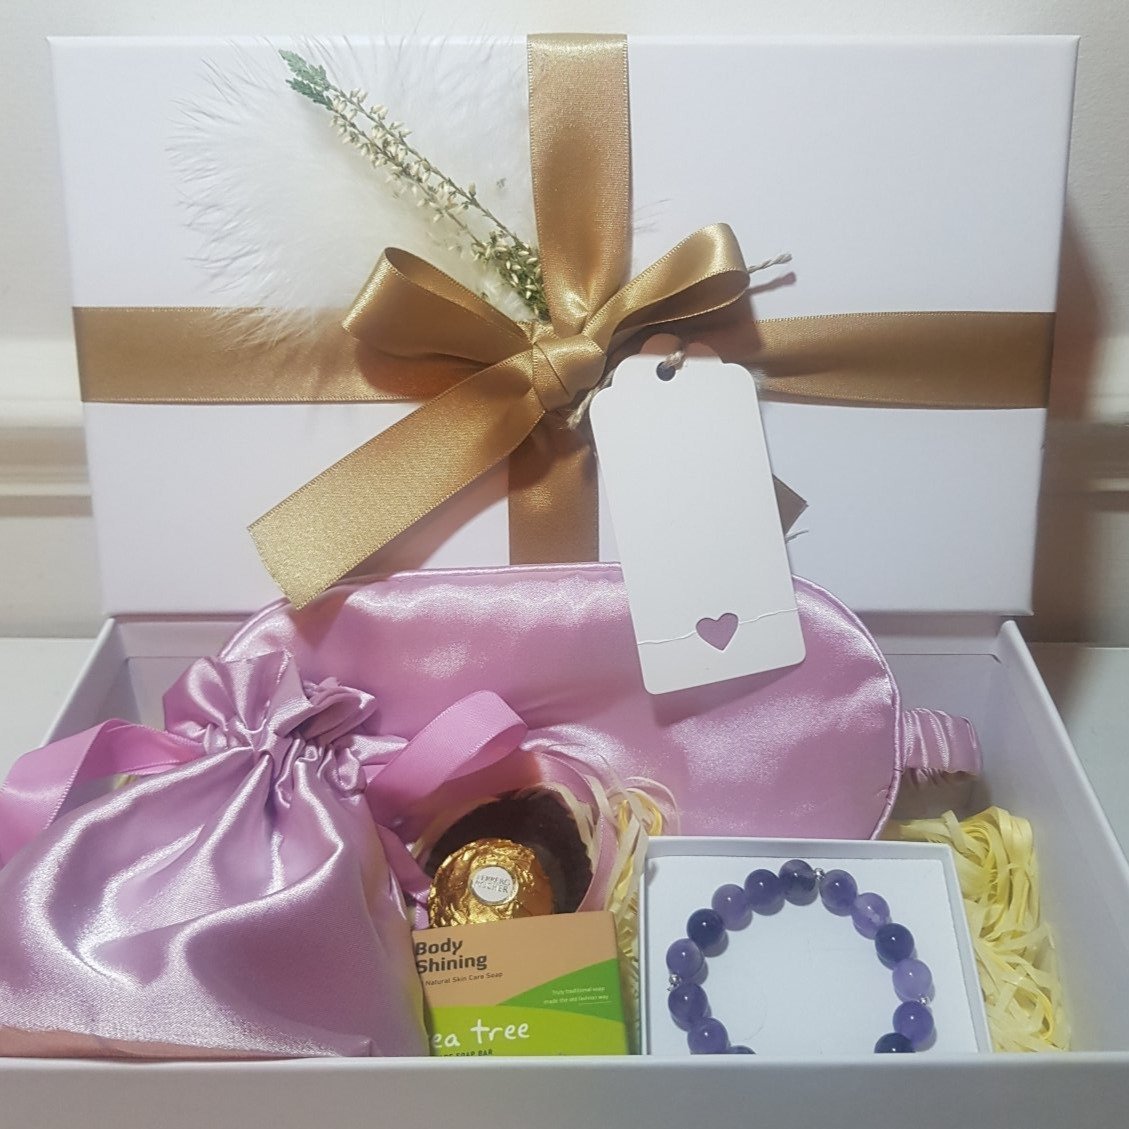 Beautiful Self-Care Gift Box with Gemstone Bracelet & Pink Coloured Accessories for her - MCA Design by Maria